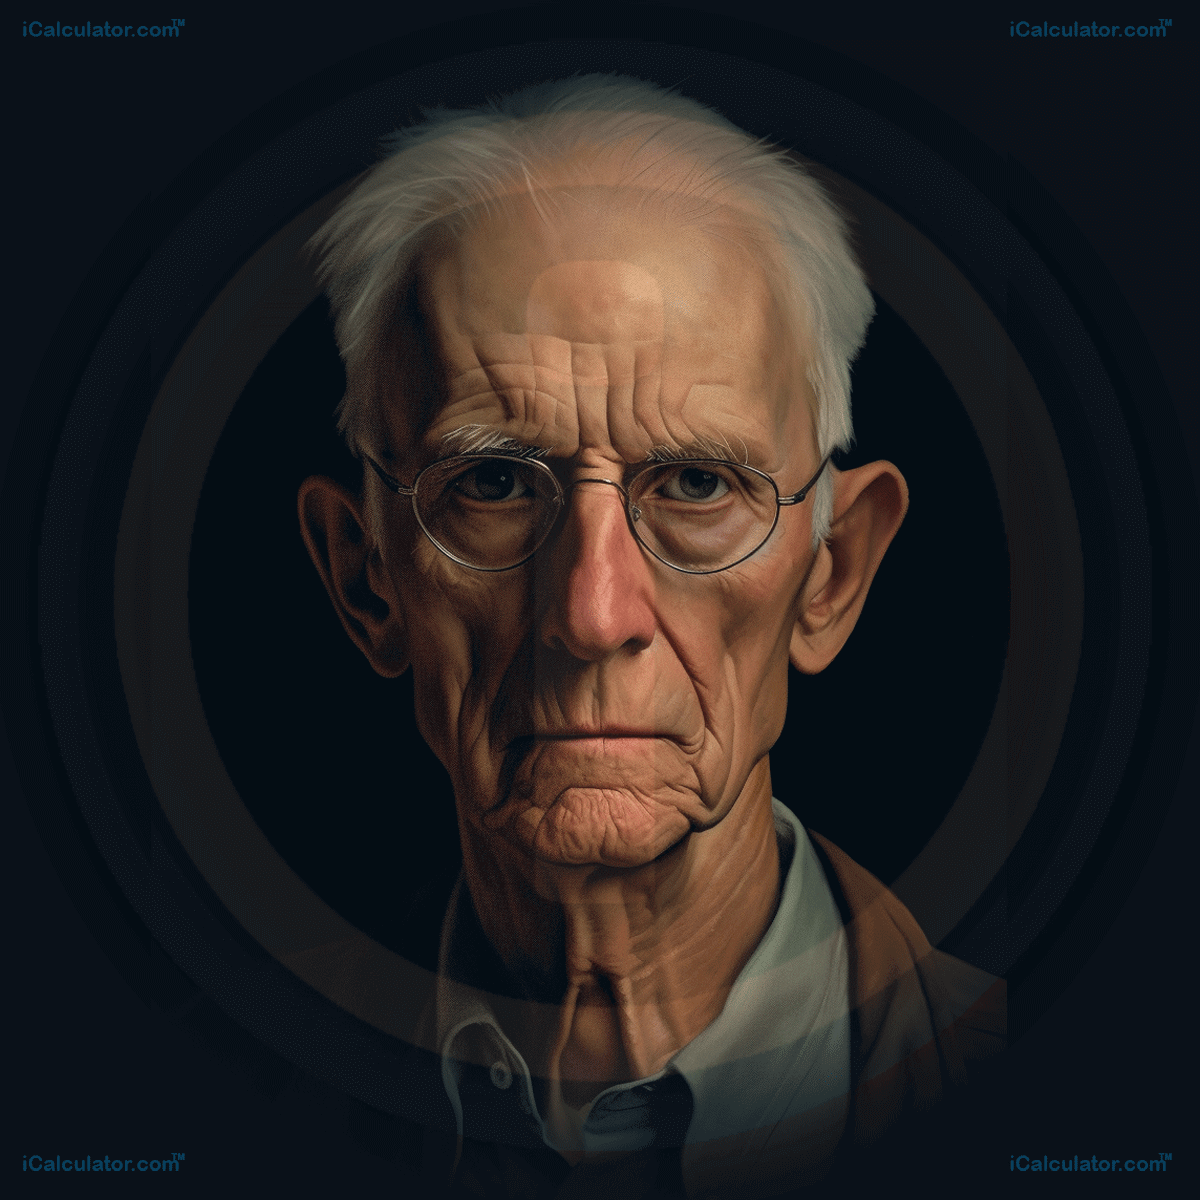 This image shows the physists George E Smith, a renowned scientist who advanced the world of phyics. George E. Smith: The Visionary Physicist Behind the Digital Imaging Revolution